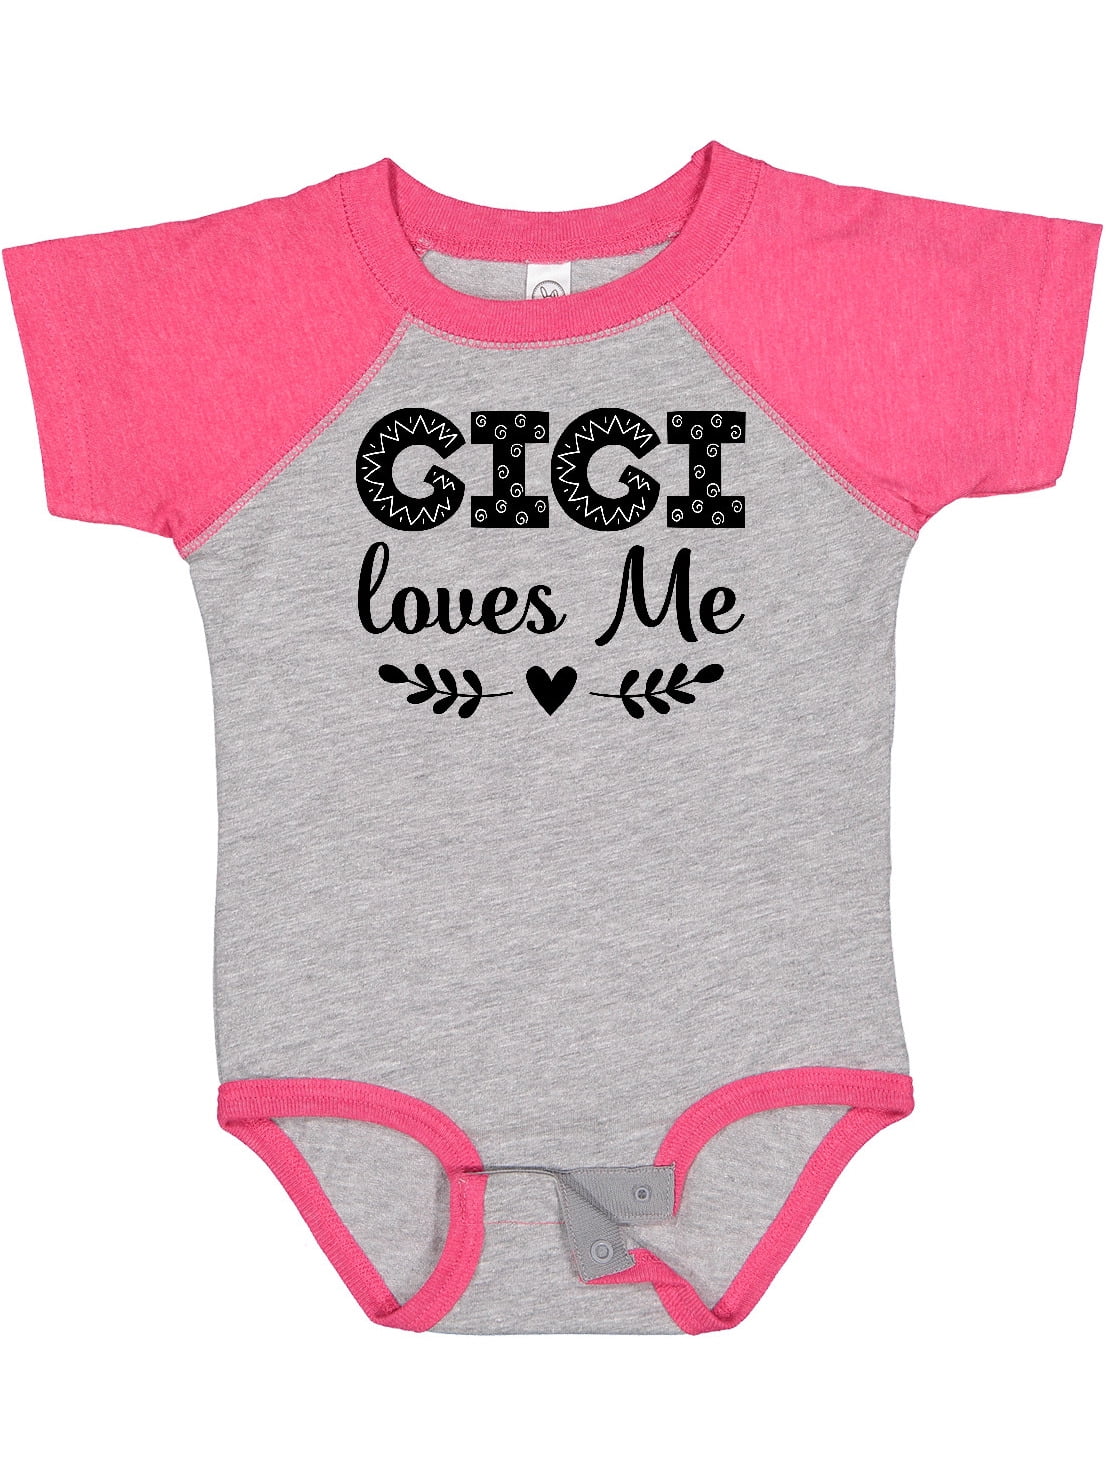 NEW Baby Girls 3-6 Months Bodysuit Creeper Outfit Infant 1 Piece Grandma Pink 